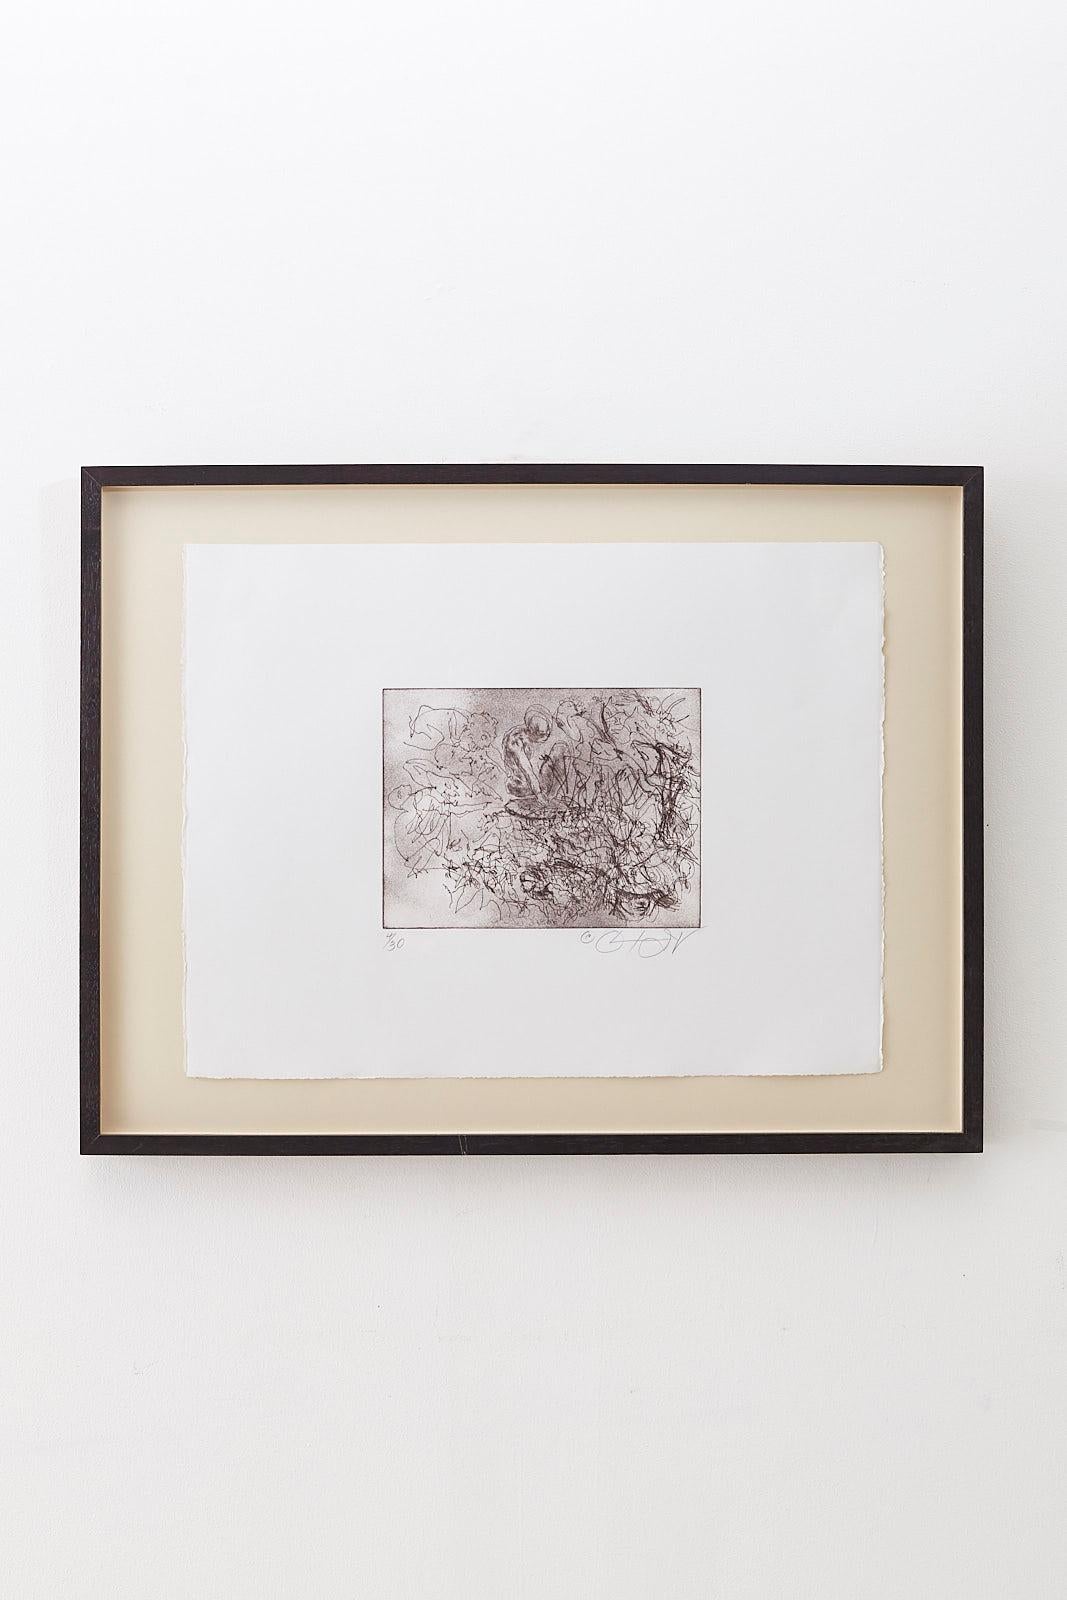 Oliver Lee Jackson (American b. 1935) Intaglio print XVI etching ink on paper, circa 2007. Pencil signed lower right edition #4 of 30. Museum quality mounted and framed using Truguard conservation glass in an ebonized frame.